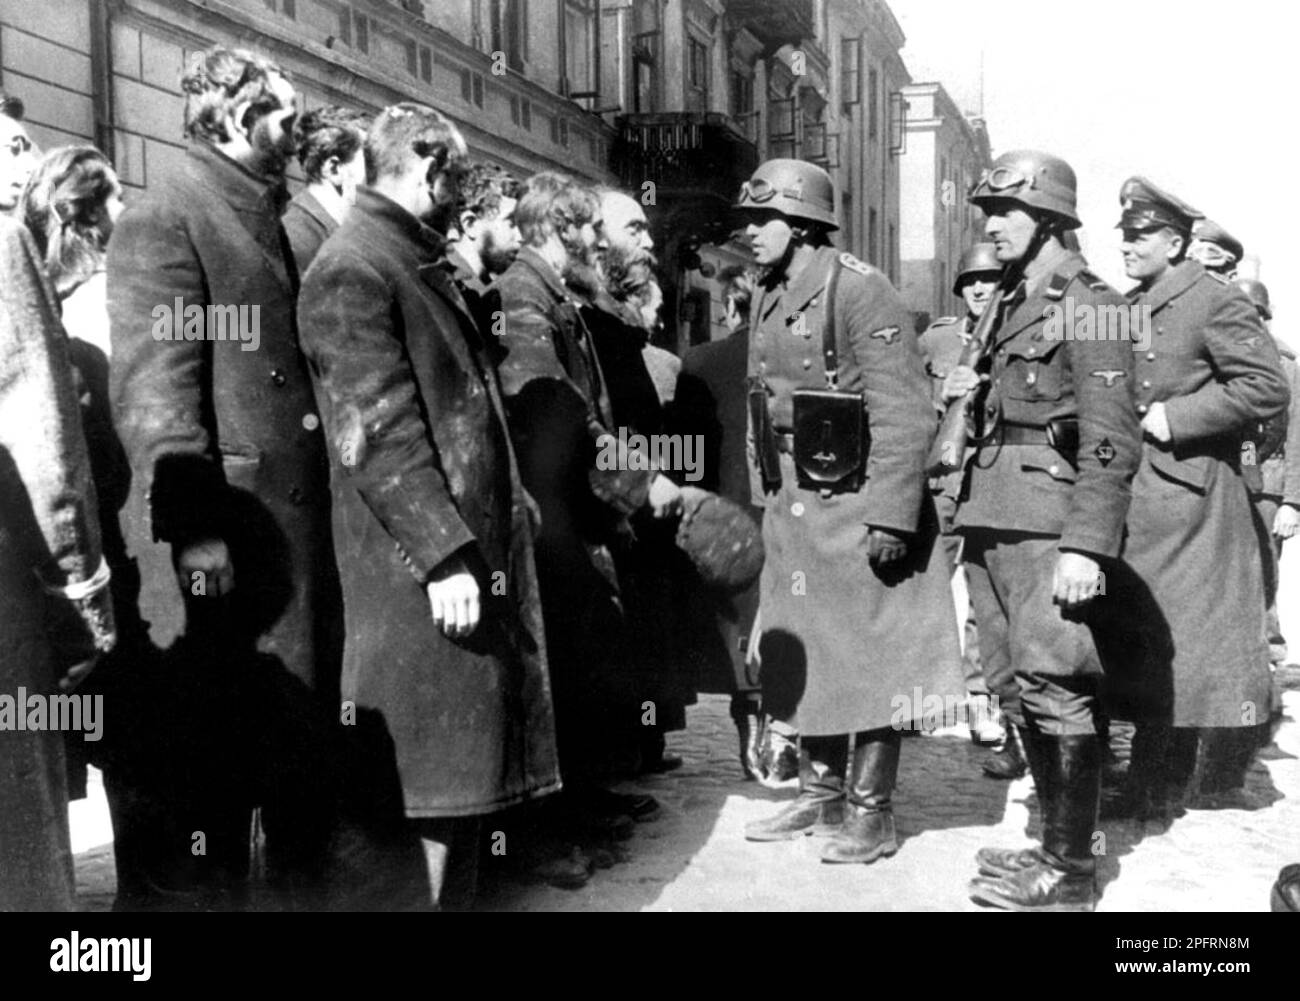 In January 1943 the nazis arrived to round up the Jews of the Warsaw Ghetto  The Jews, resolved to fight it out, took on the SS with homemade and primitive weapons. The defenders were executed or deported and the Ghetto area was systematically demolished. This event is known as The Ghetto Uprising.This image shows German soldiers talking to Rabbi Heschel Rappaport. This image is from the German photographic record of the event, known as the Stroop report. Stock Photo